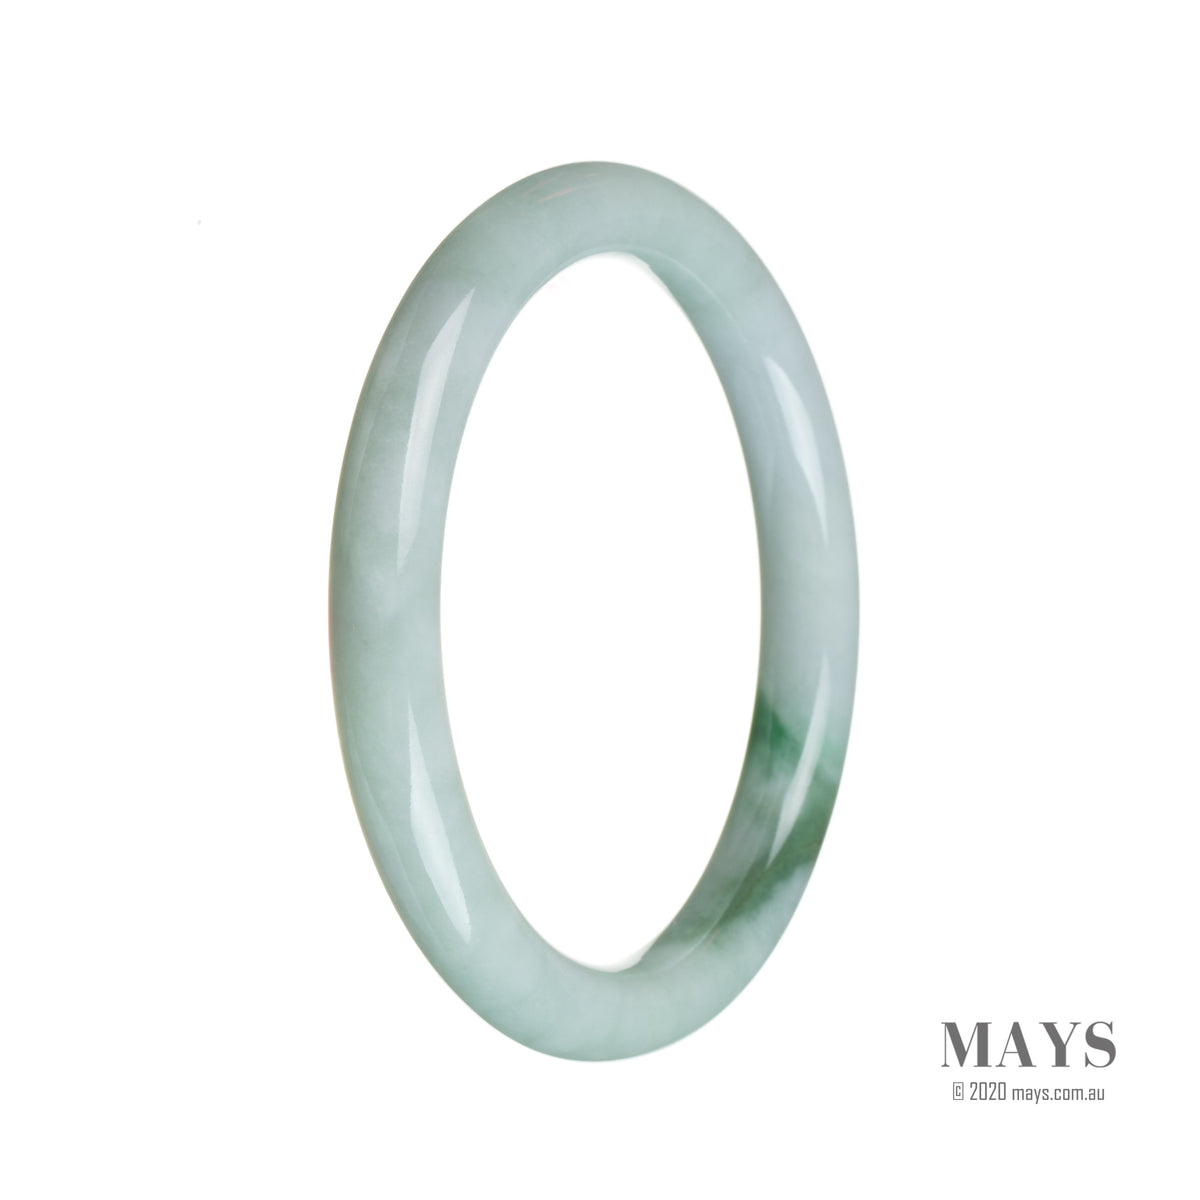 A close-up image of a round, green and white jade bangle bracelet with a traditional pattern. The bracelet is 59mm in size and is considered an authentic Type A Jade.